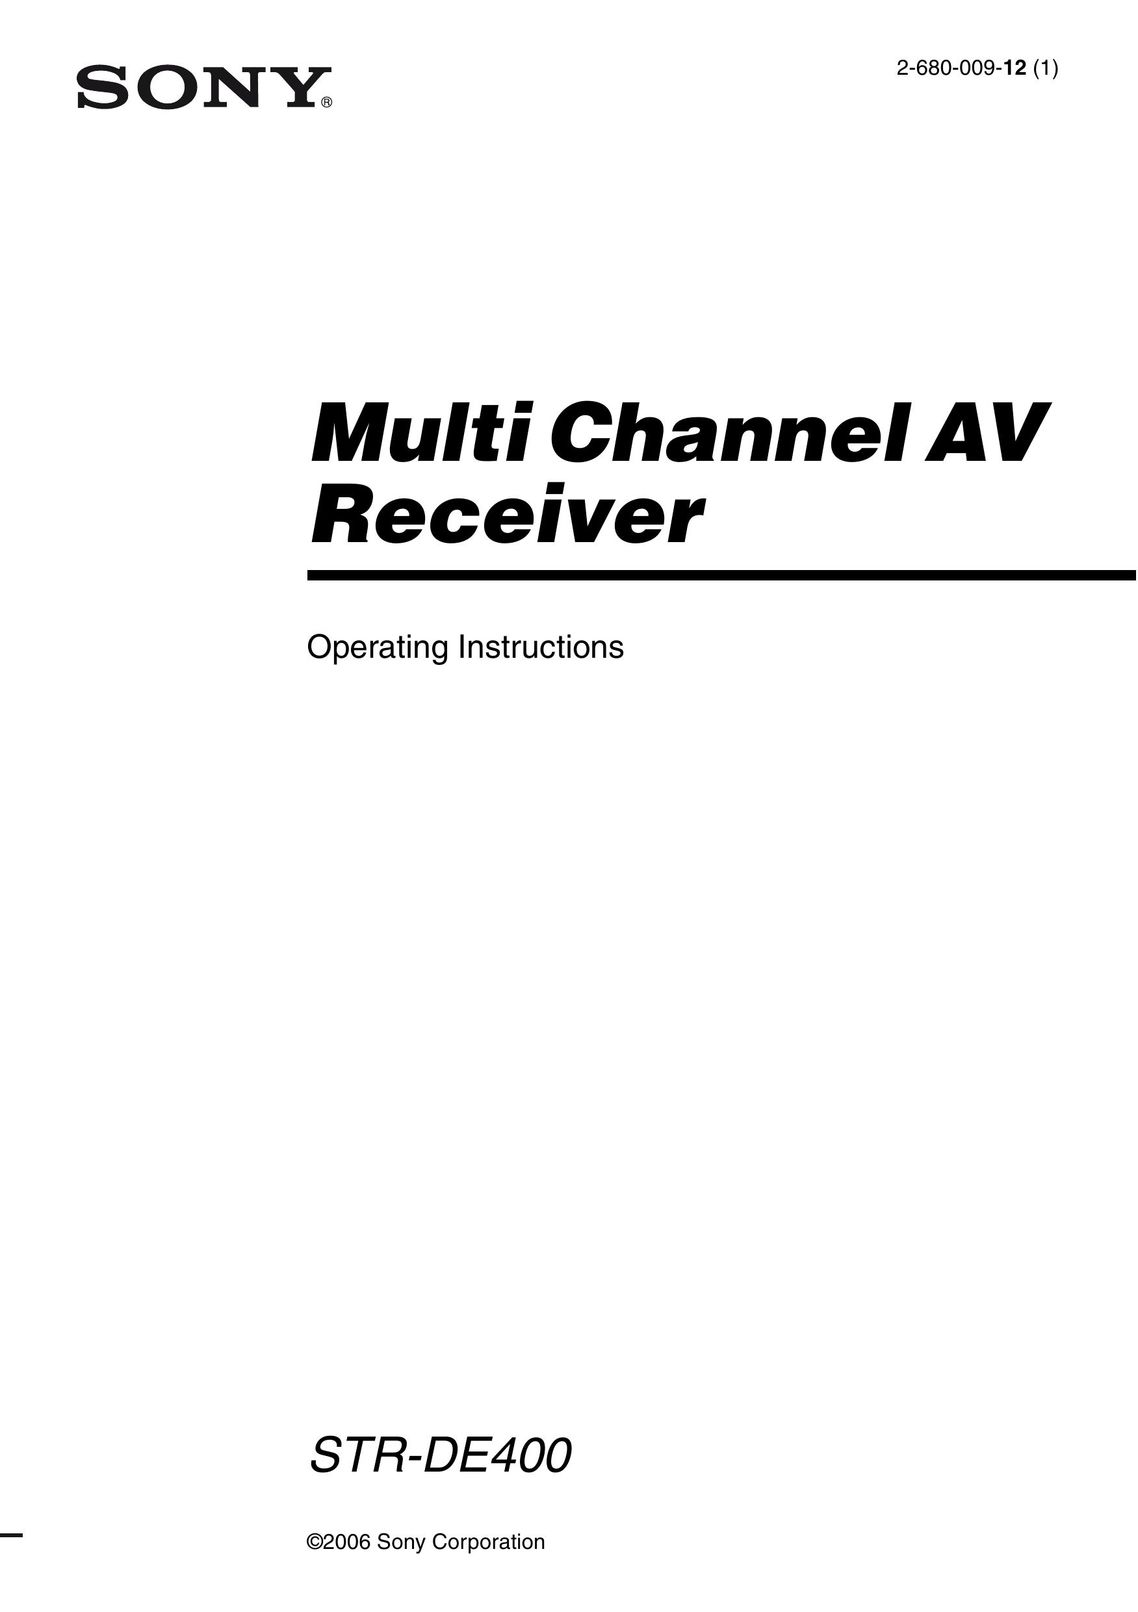 Sony 2-680-009-12 (1) Stereo Receiver User Manual